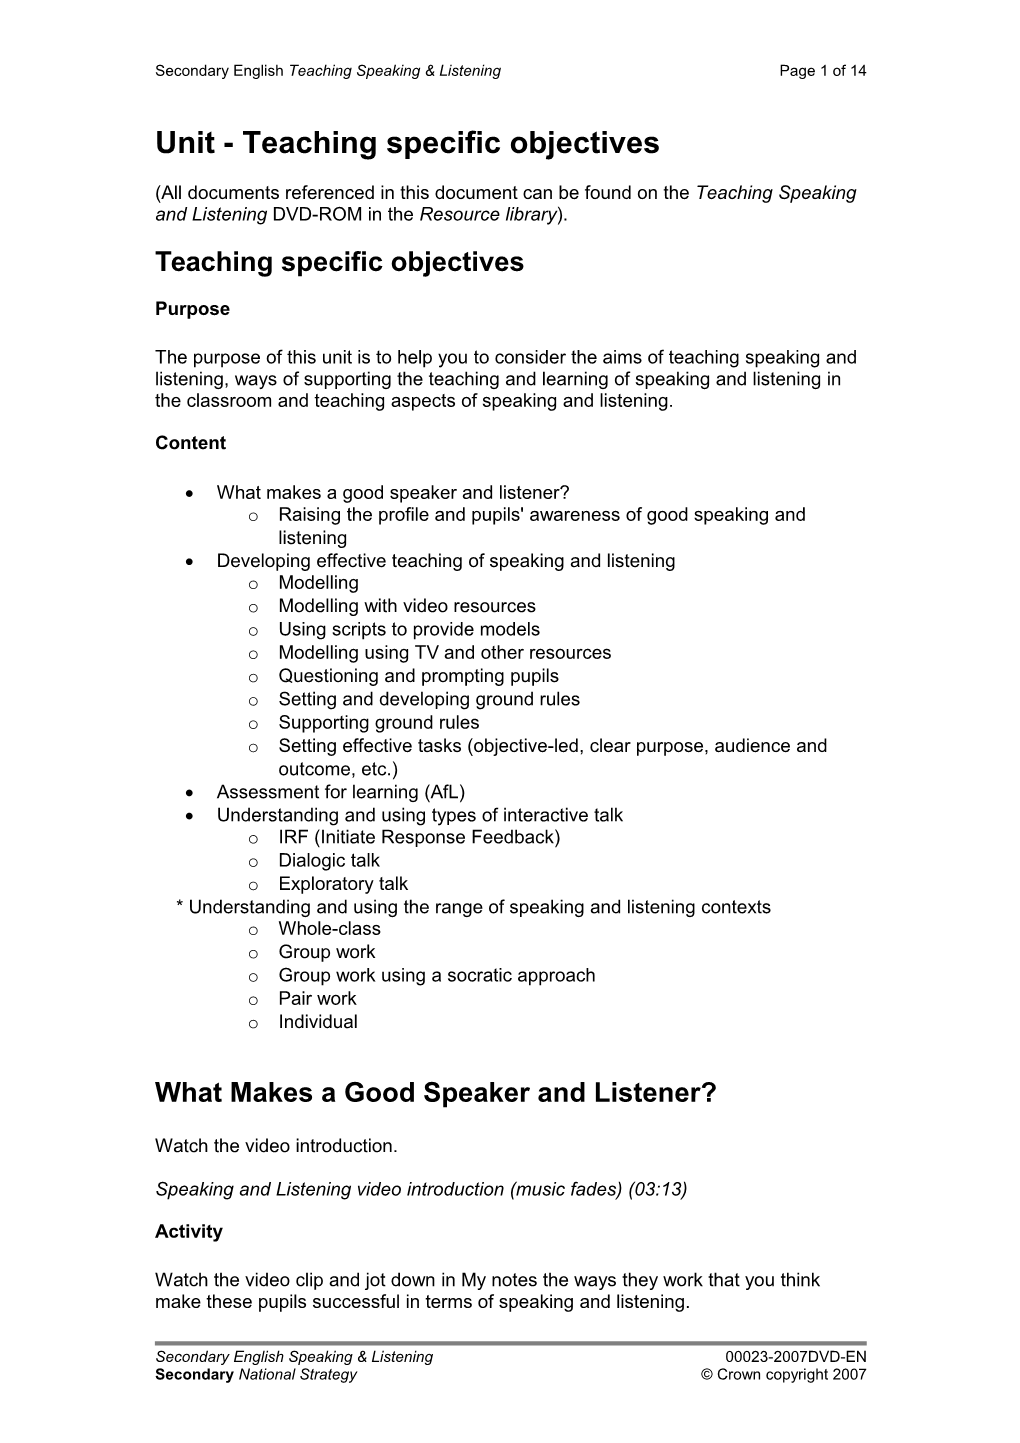 Subject Leader, Unit 2 - Teaching and Assessing